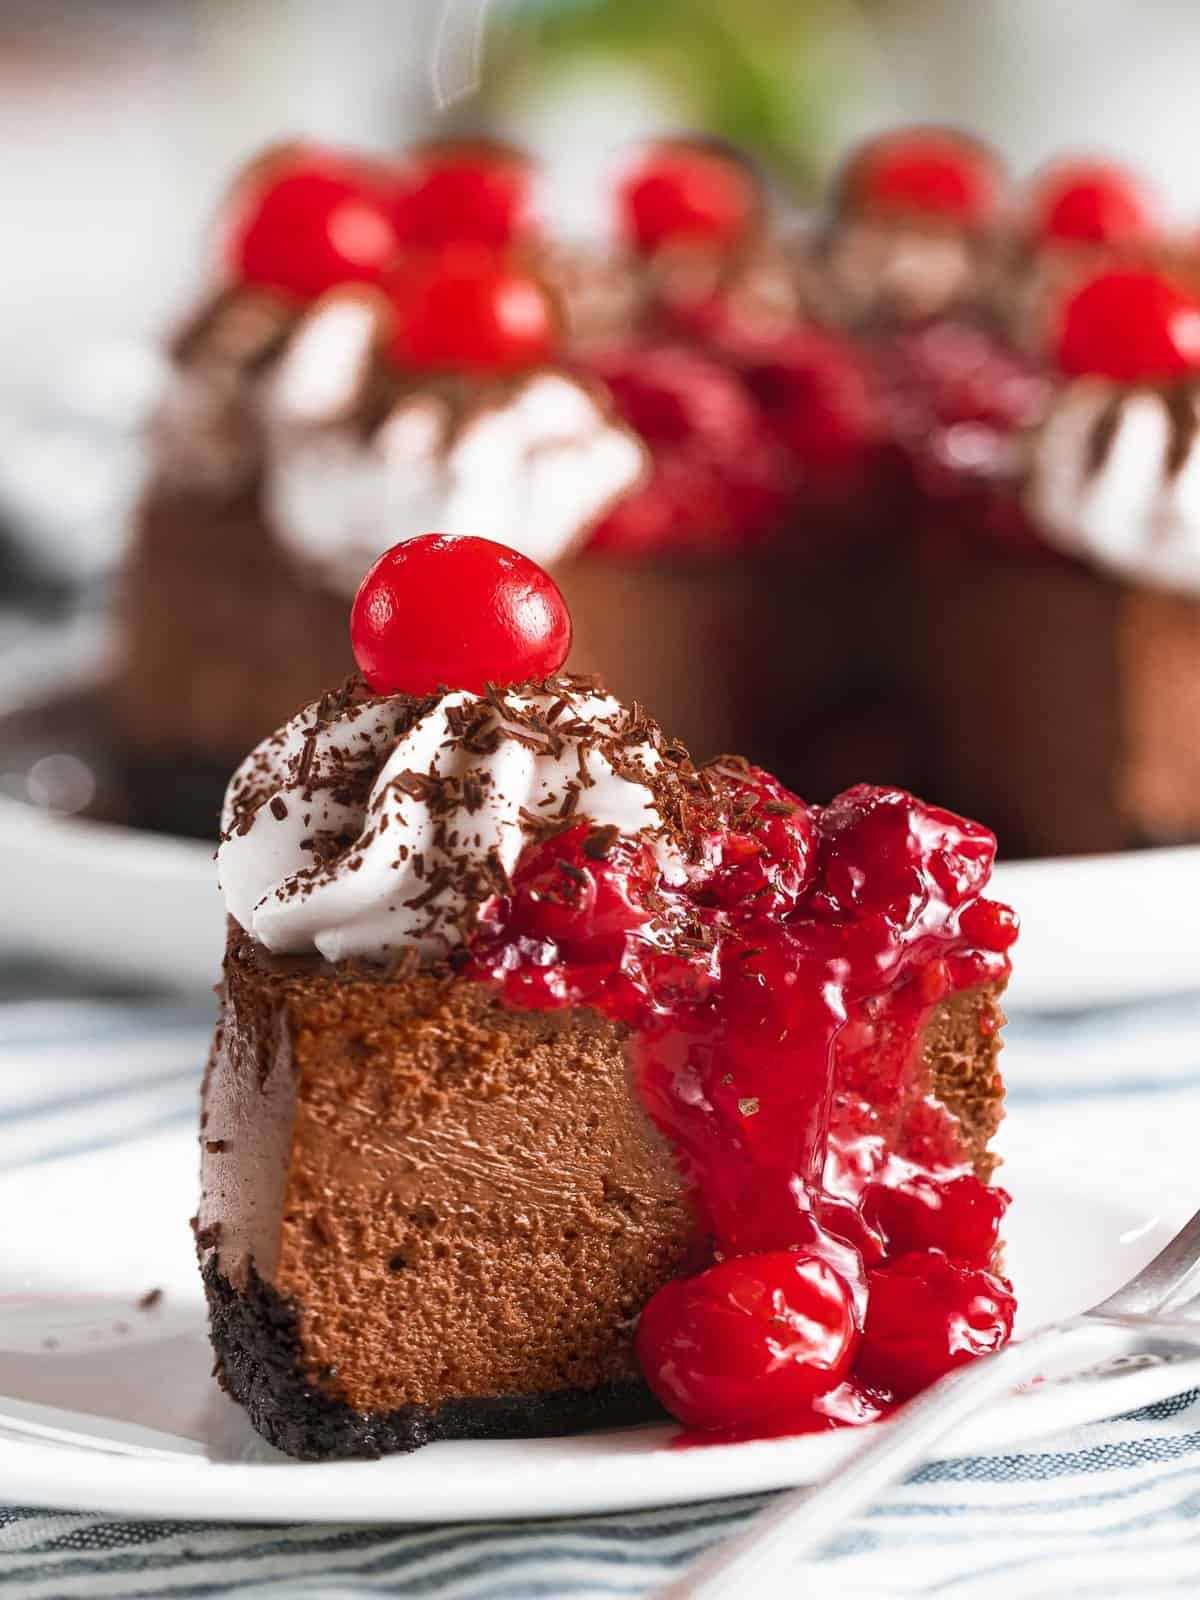 Black forest cheesecake with cherries, cherry topping, and whipped cream.